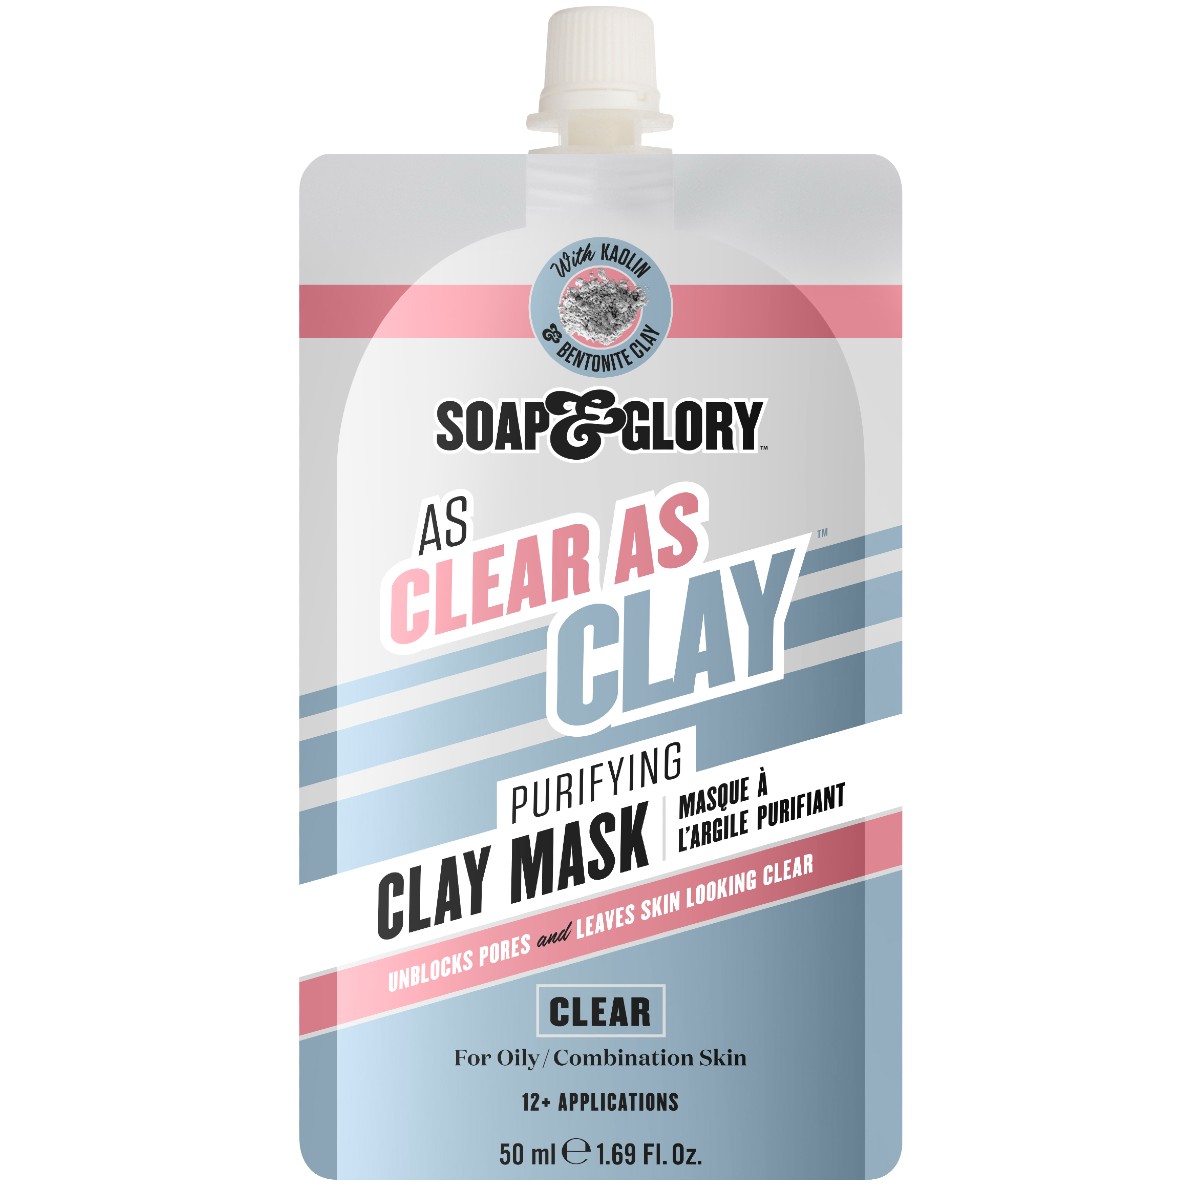 As Clear As Clay Purifying Clay Face Mask 